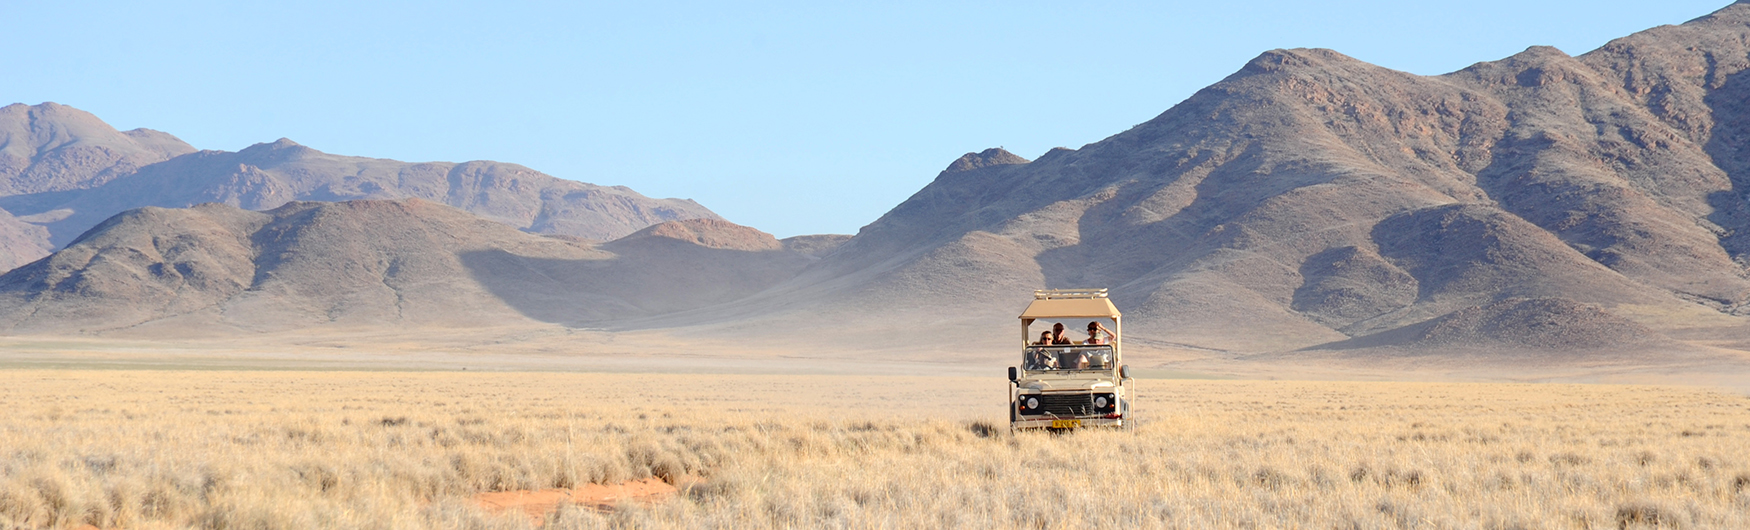 Wolwedans - Namibia - Scenic Drive Activity - 1750 x 530